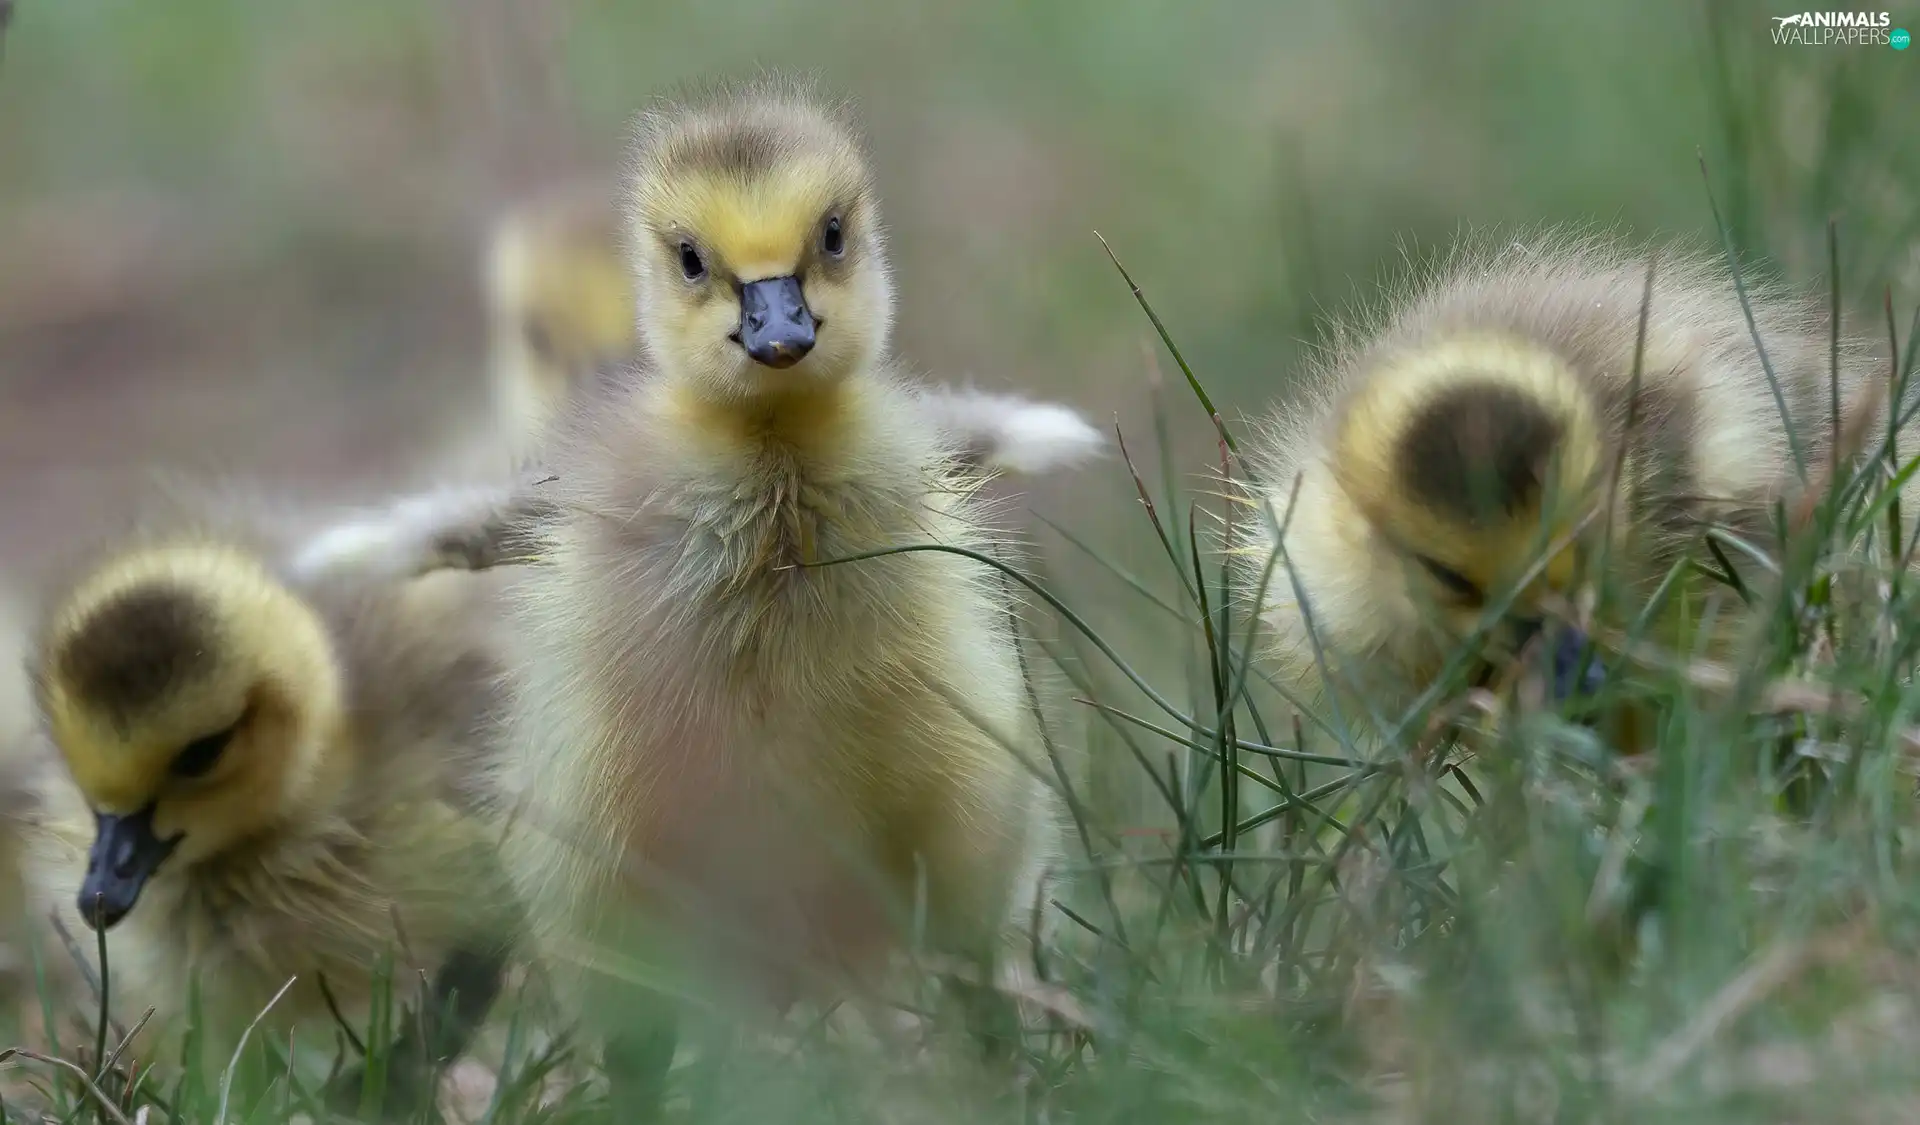 grass, geese, chick